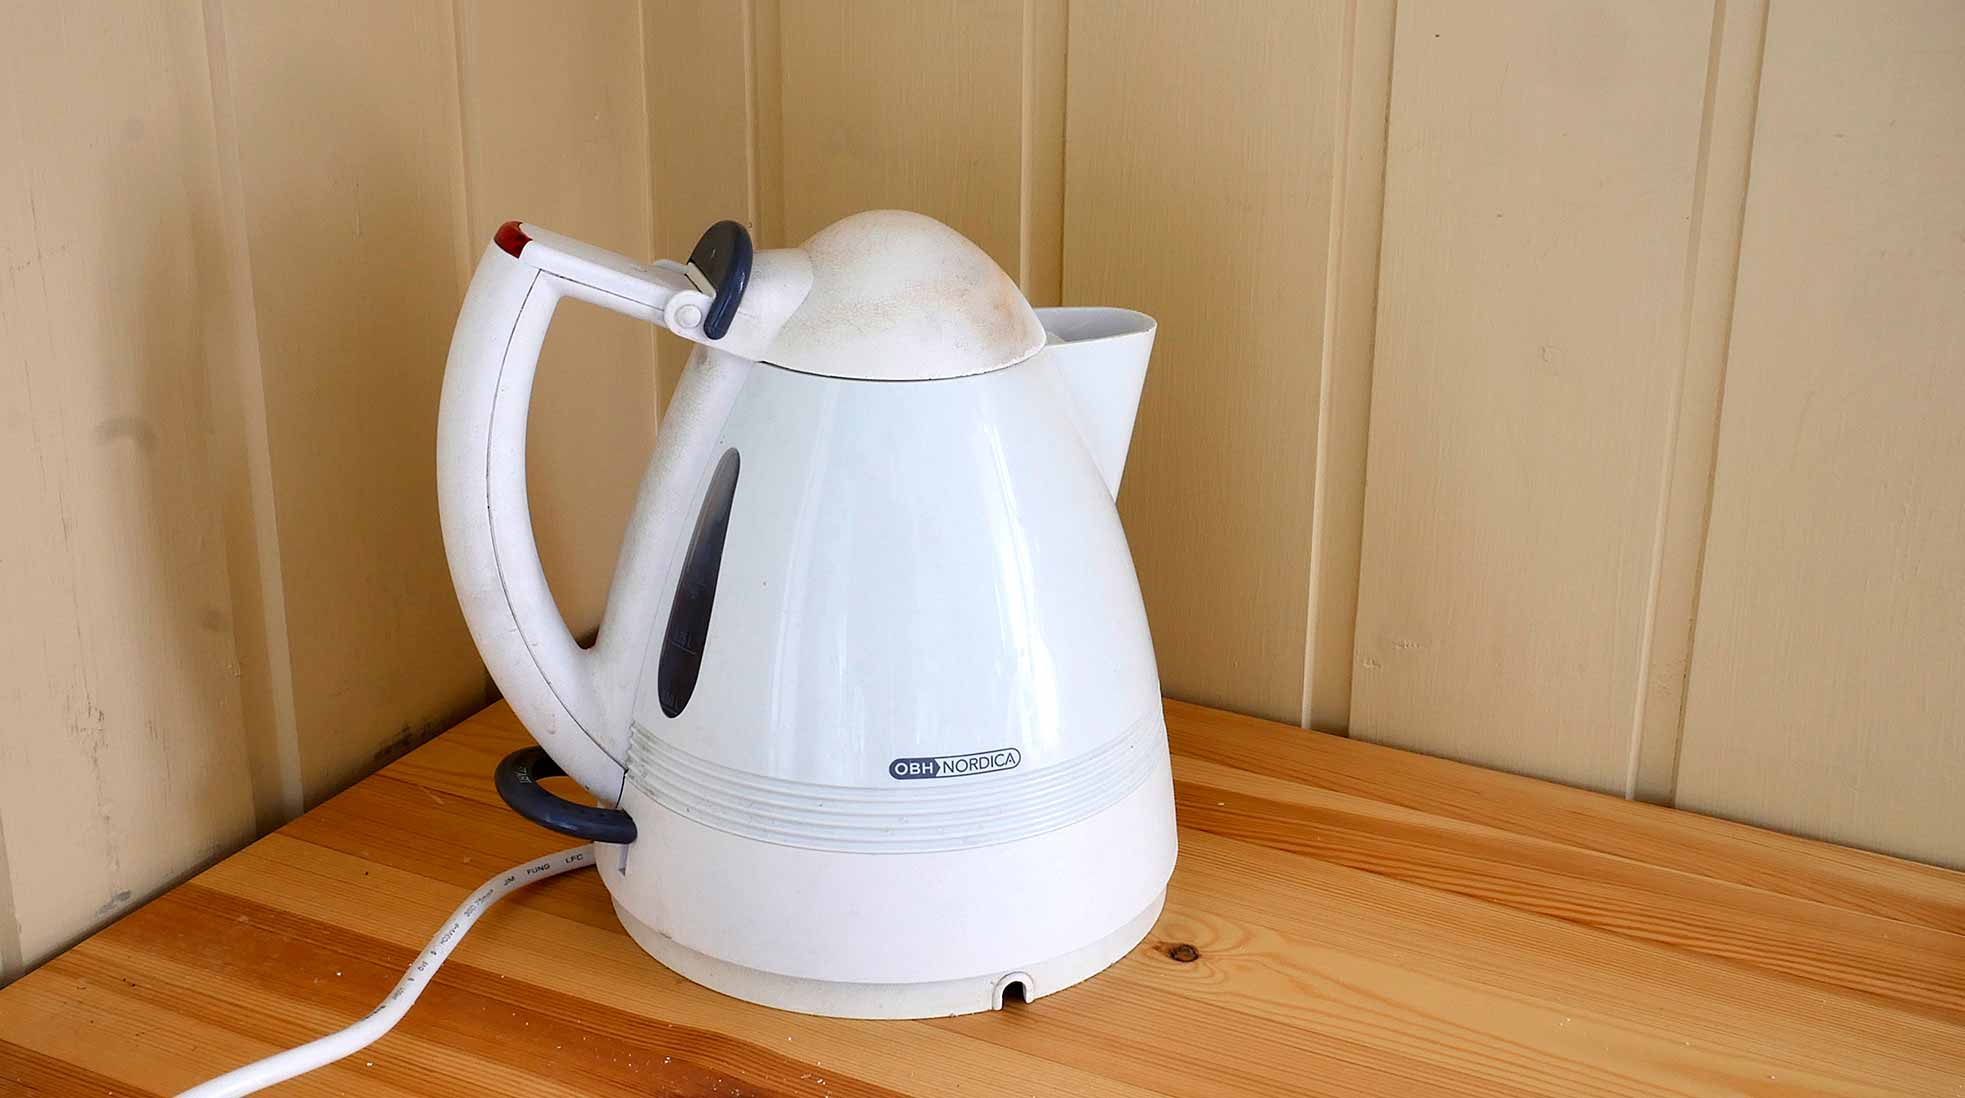 An old electric water kettle